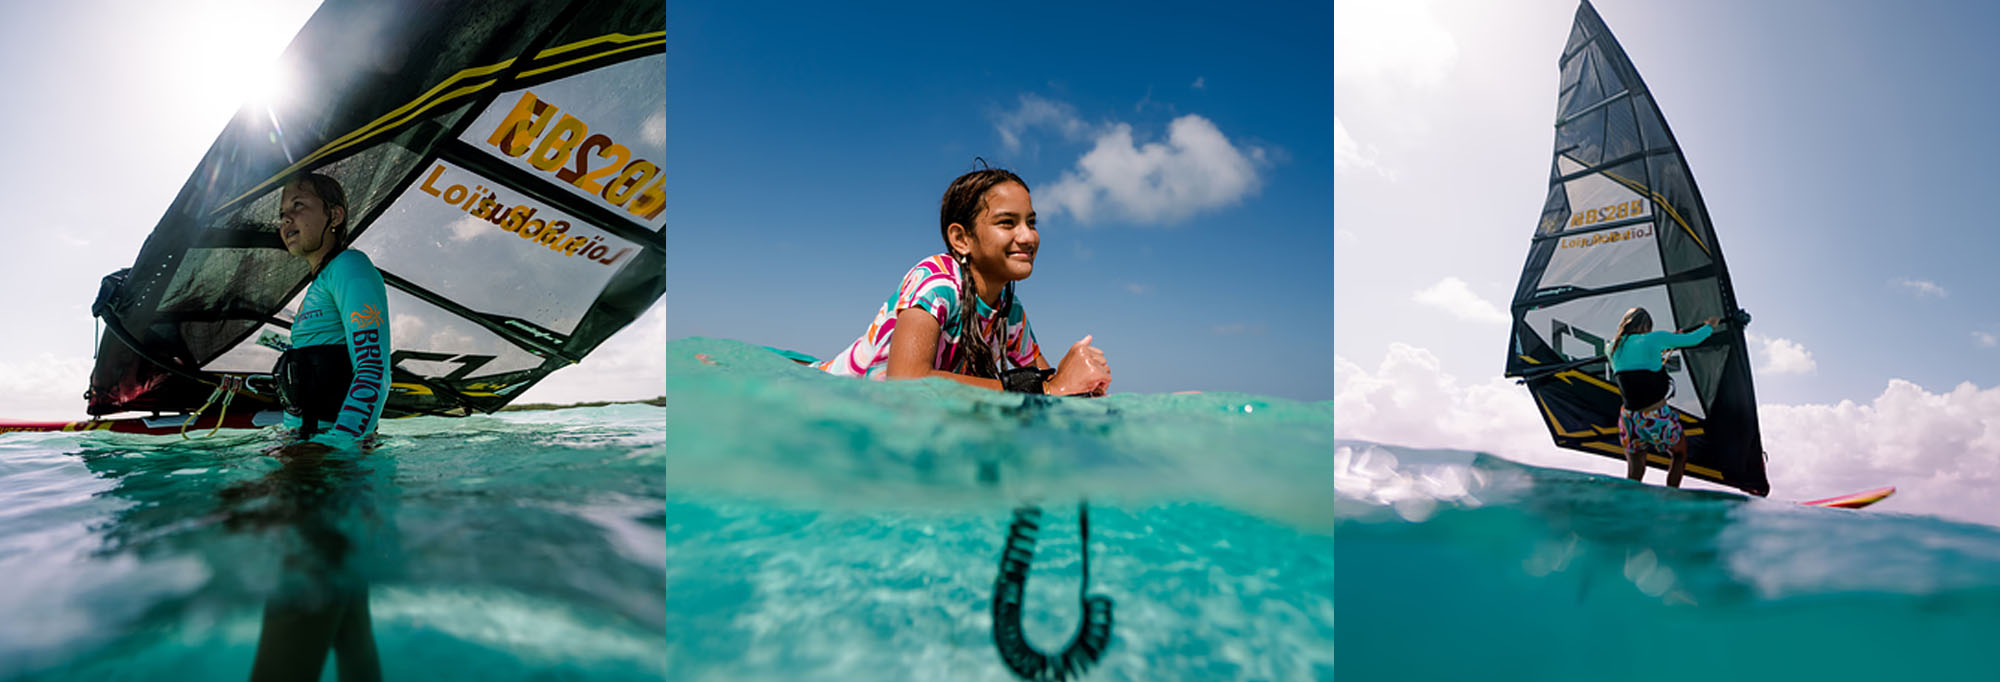 A girl is enjoying her windsurf ride, hanging in the clear water of the sea. She protects herself from the sun by wearing a rashguard from Brunotti.